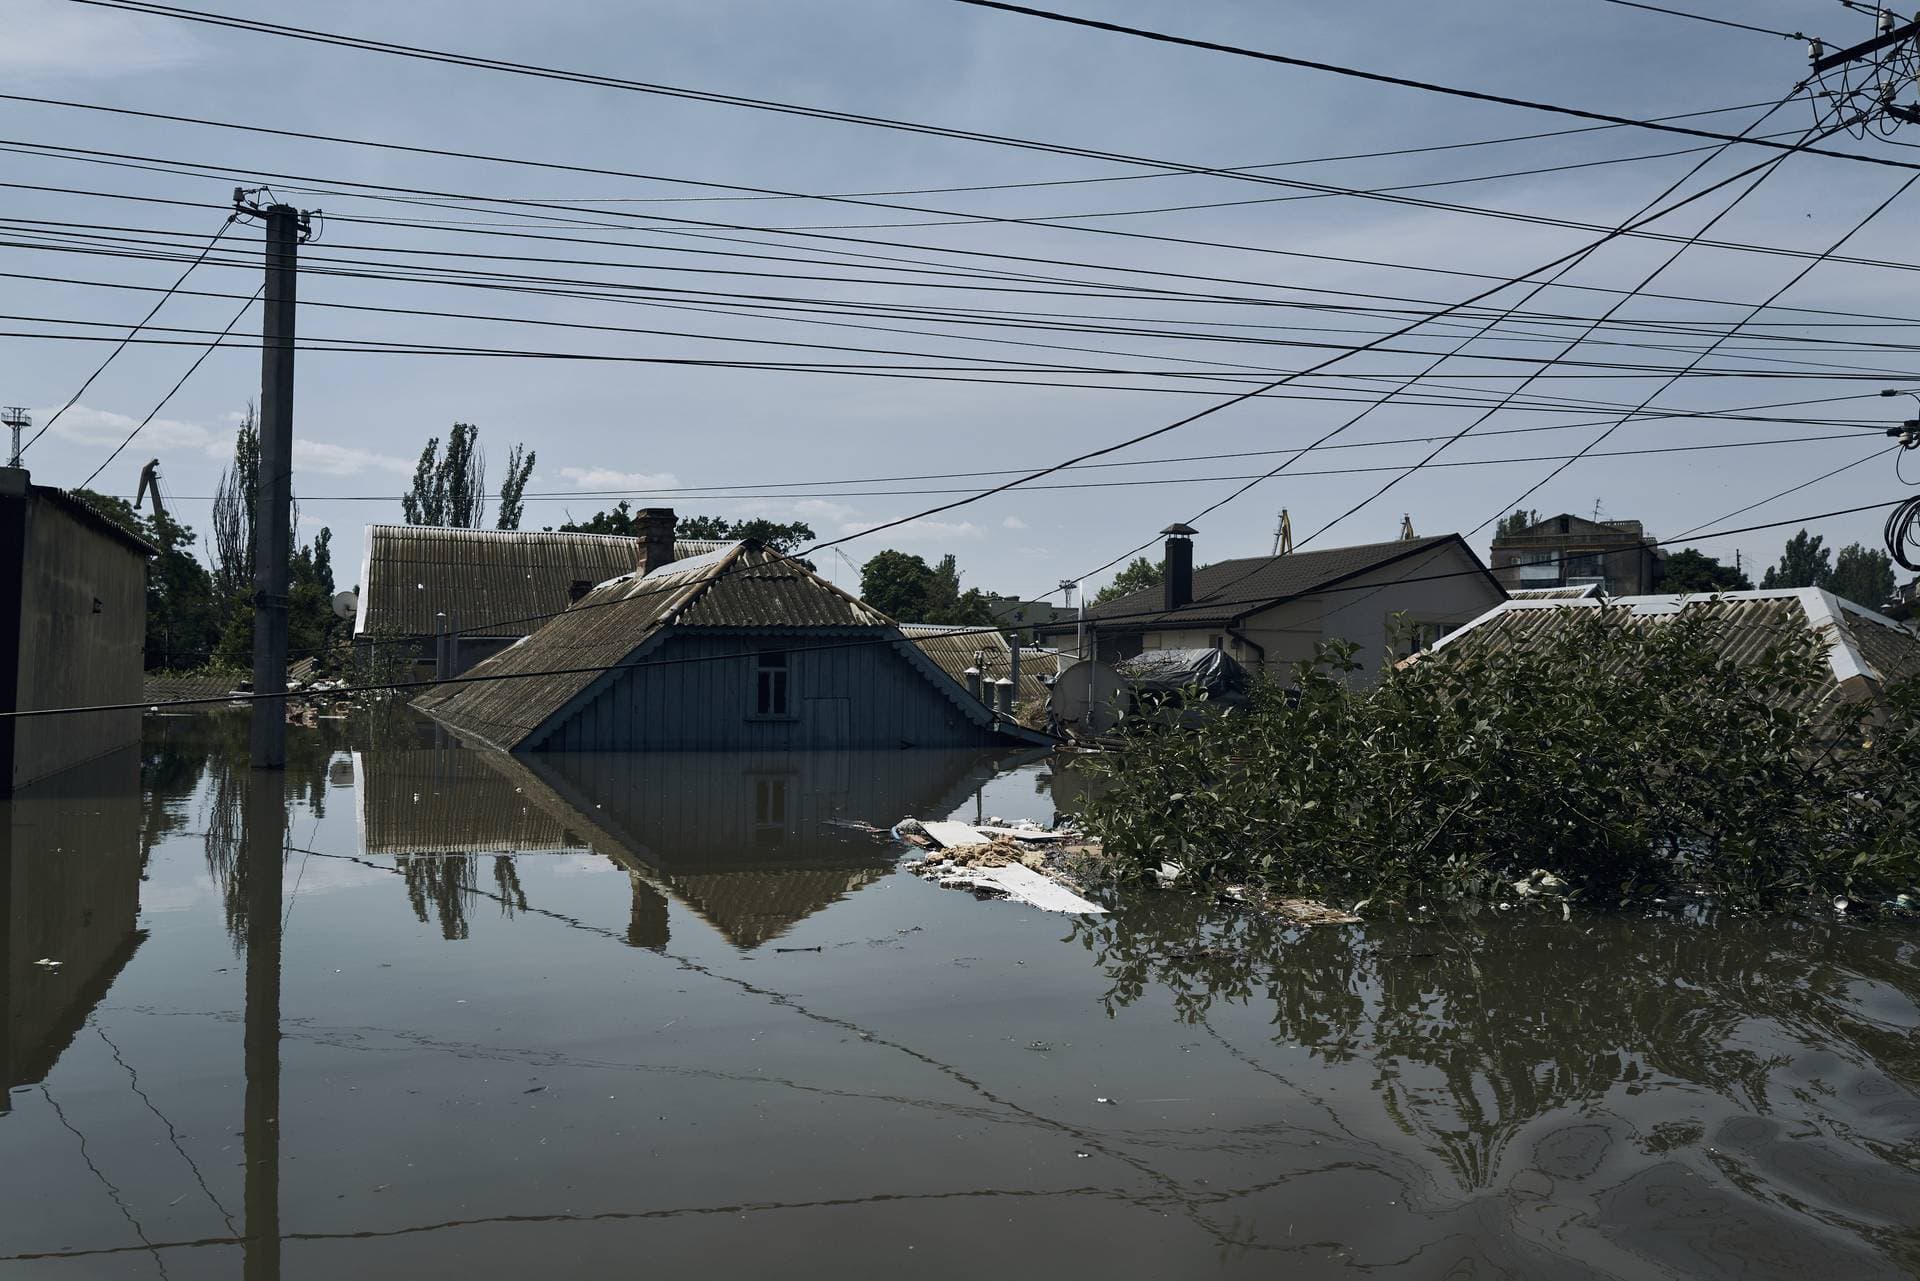 A view of the roofs of flooded private houses in Kherson